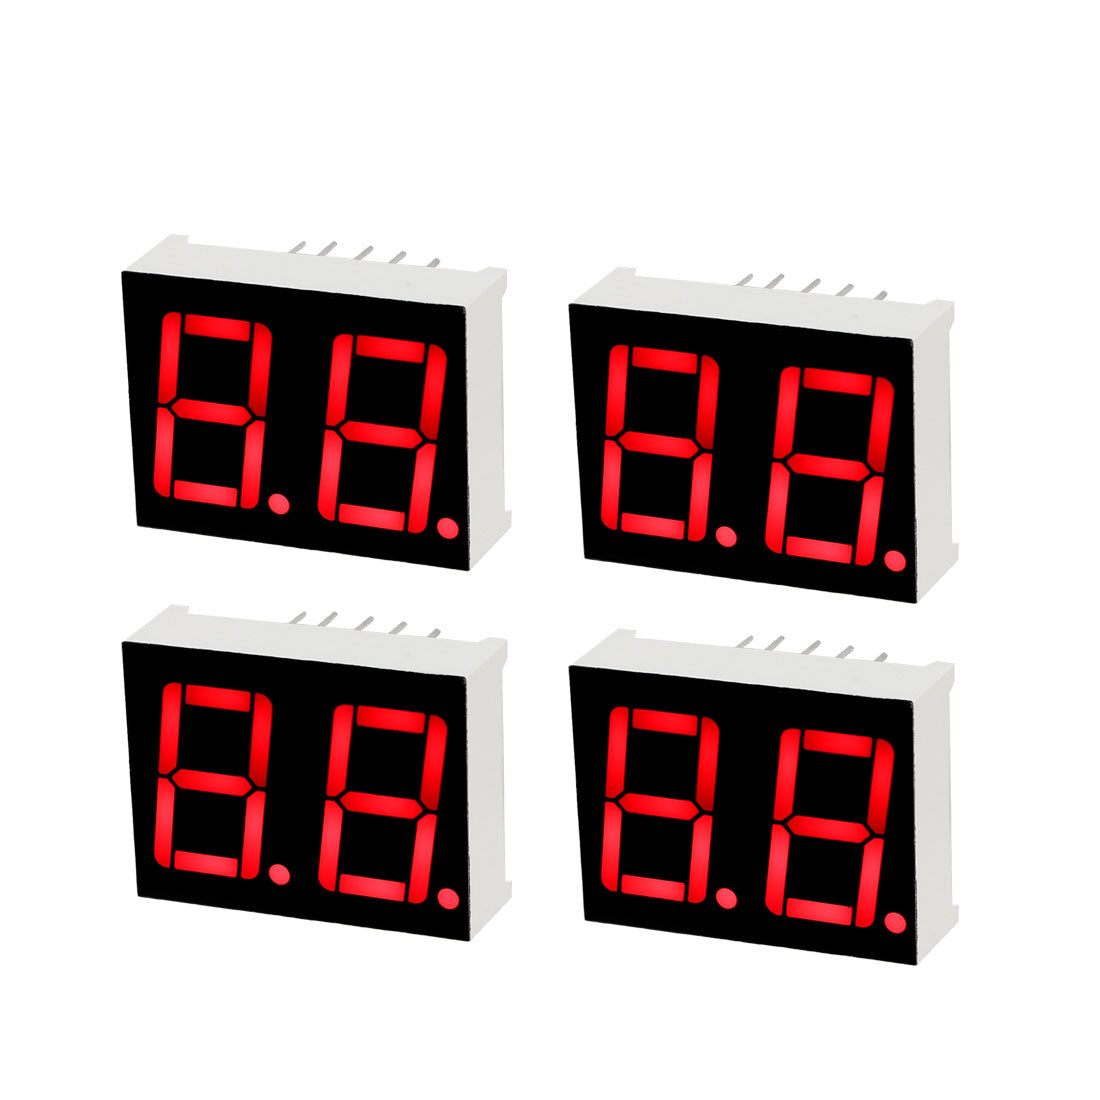 uxcell Uxcell Common Cathode 10 Pin 2 Bit 7 Segment 0.98 x 0.75 x 0.31 Inch 0.55" Red LED Display Digital Tube 4pcs